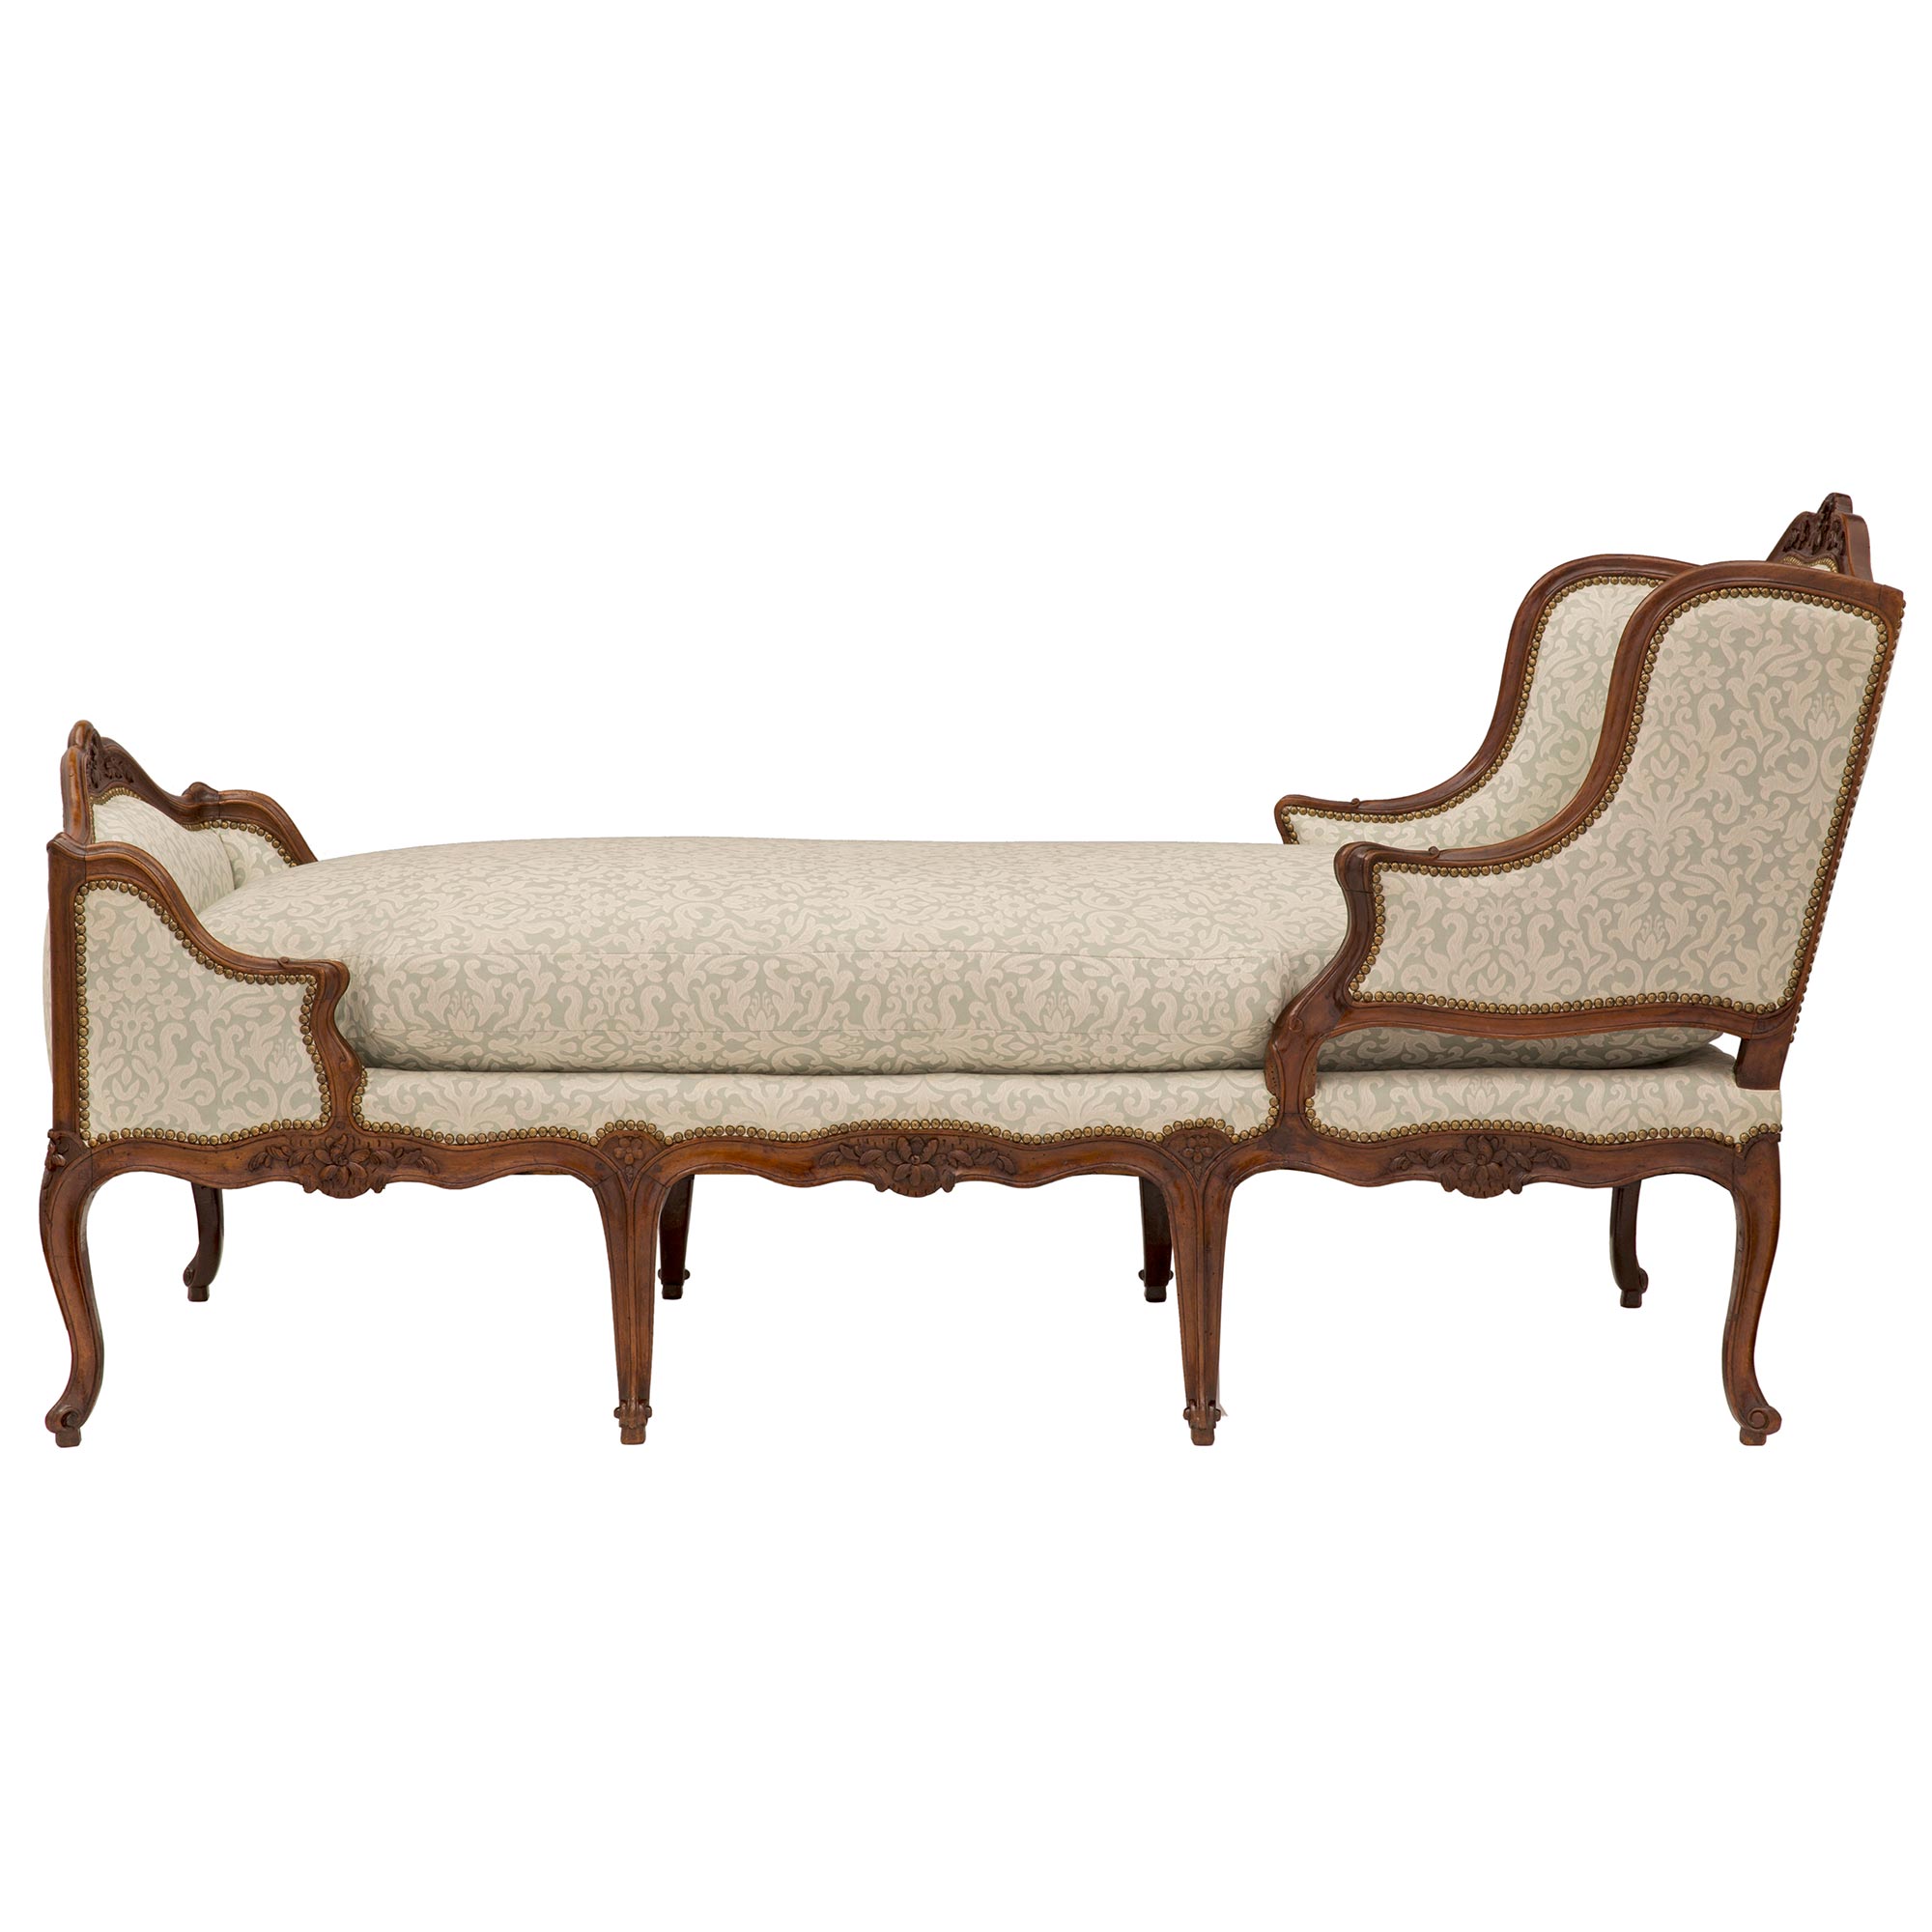 Antique Louis XV style chaise lounge.